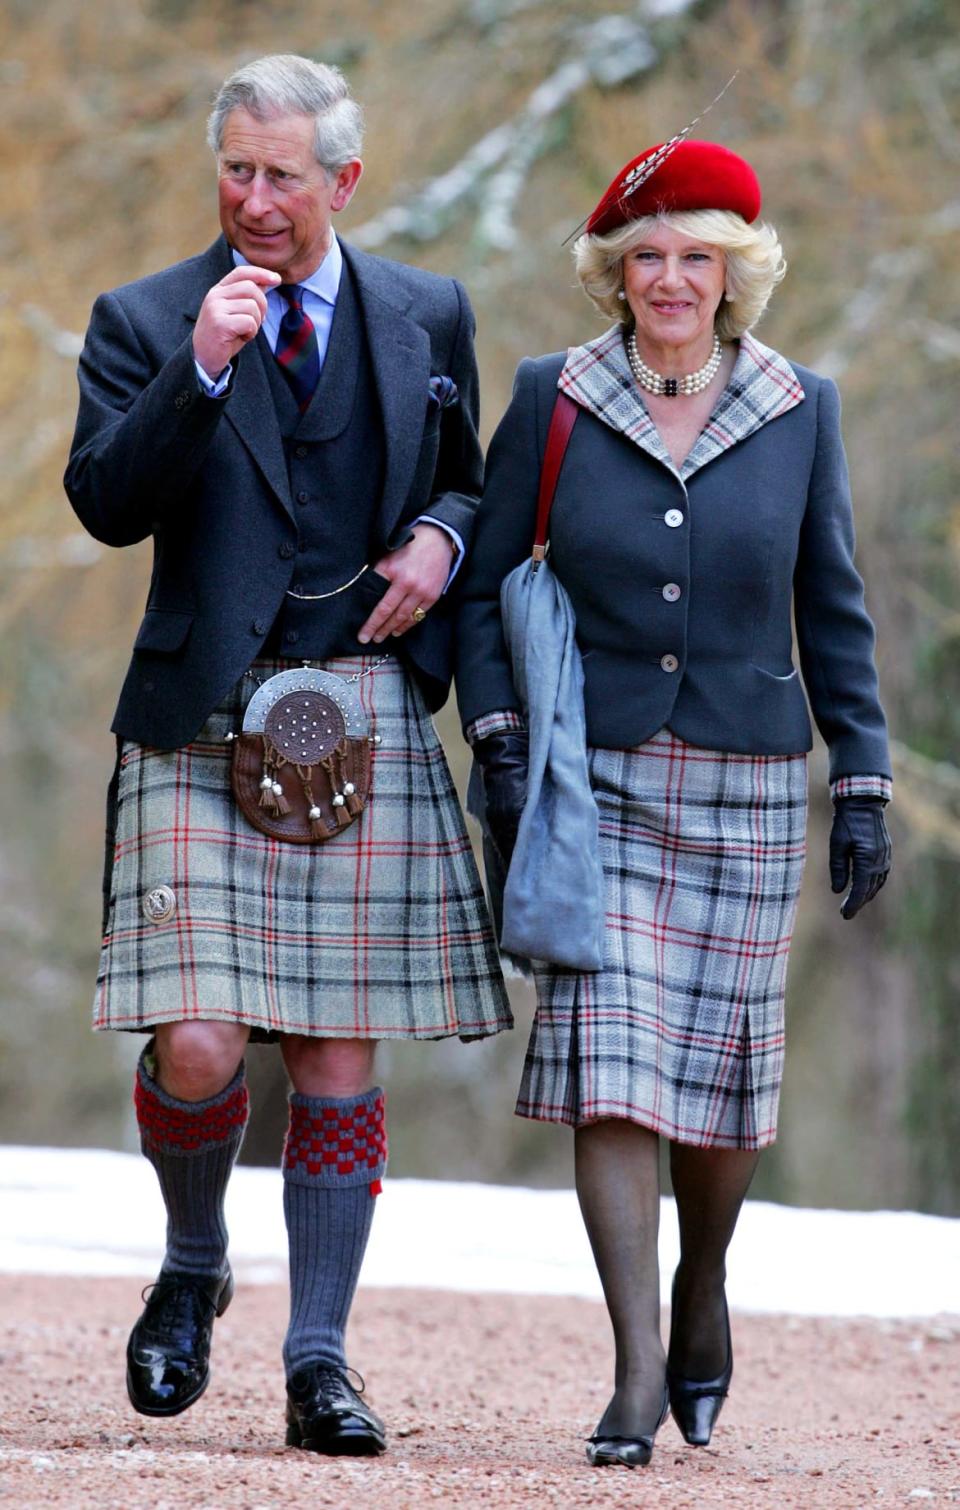 <div class="inline-image__caption"><p>Britain's Prince Charles and his wife Camilla, Duchess of Cornwall, leave Crathie Church at Balmoral in Scotland, after attending a service on their first wedding anniversary, April 9, 2006.</p></div> <div class="inline-image__credit">REUTERS/ Gordon Jack</div>